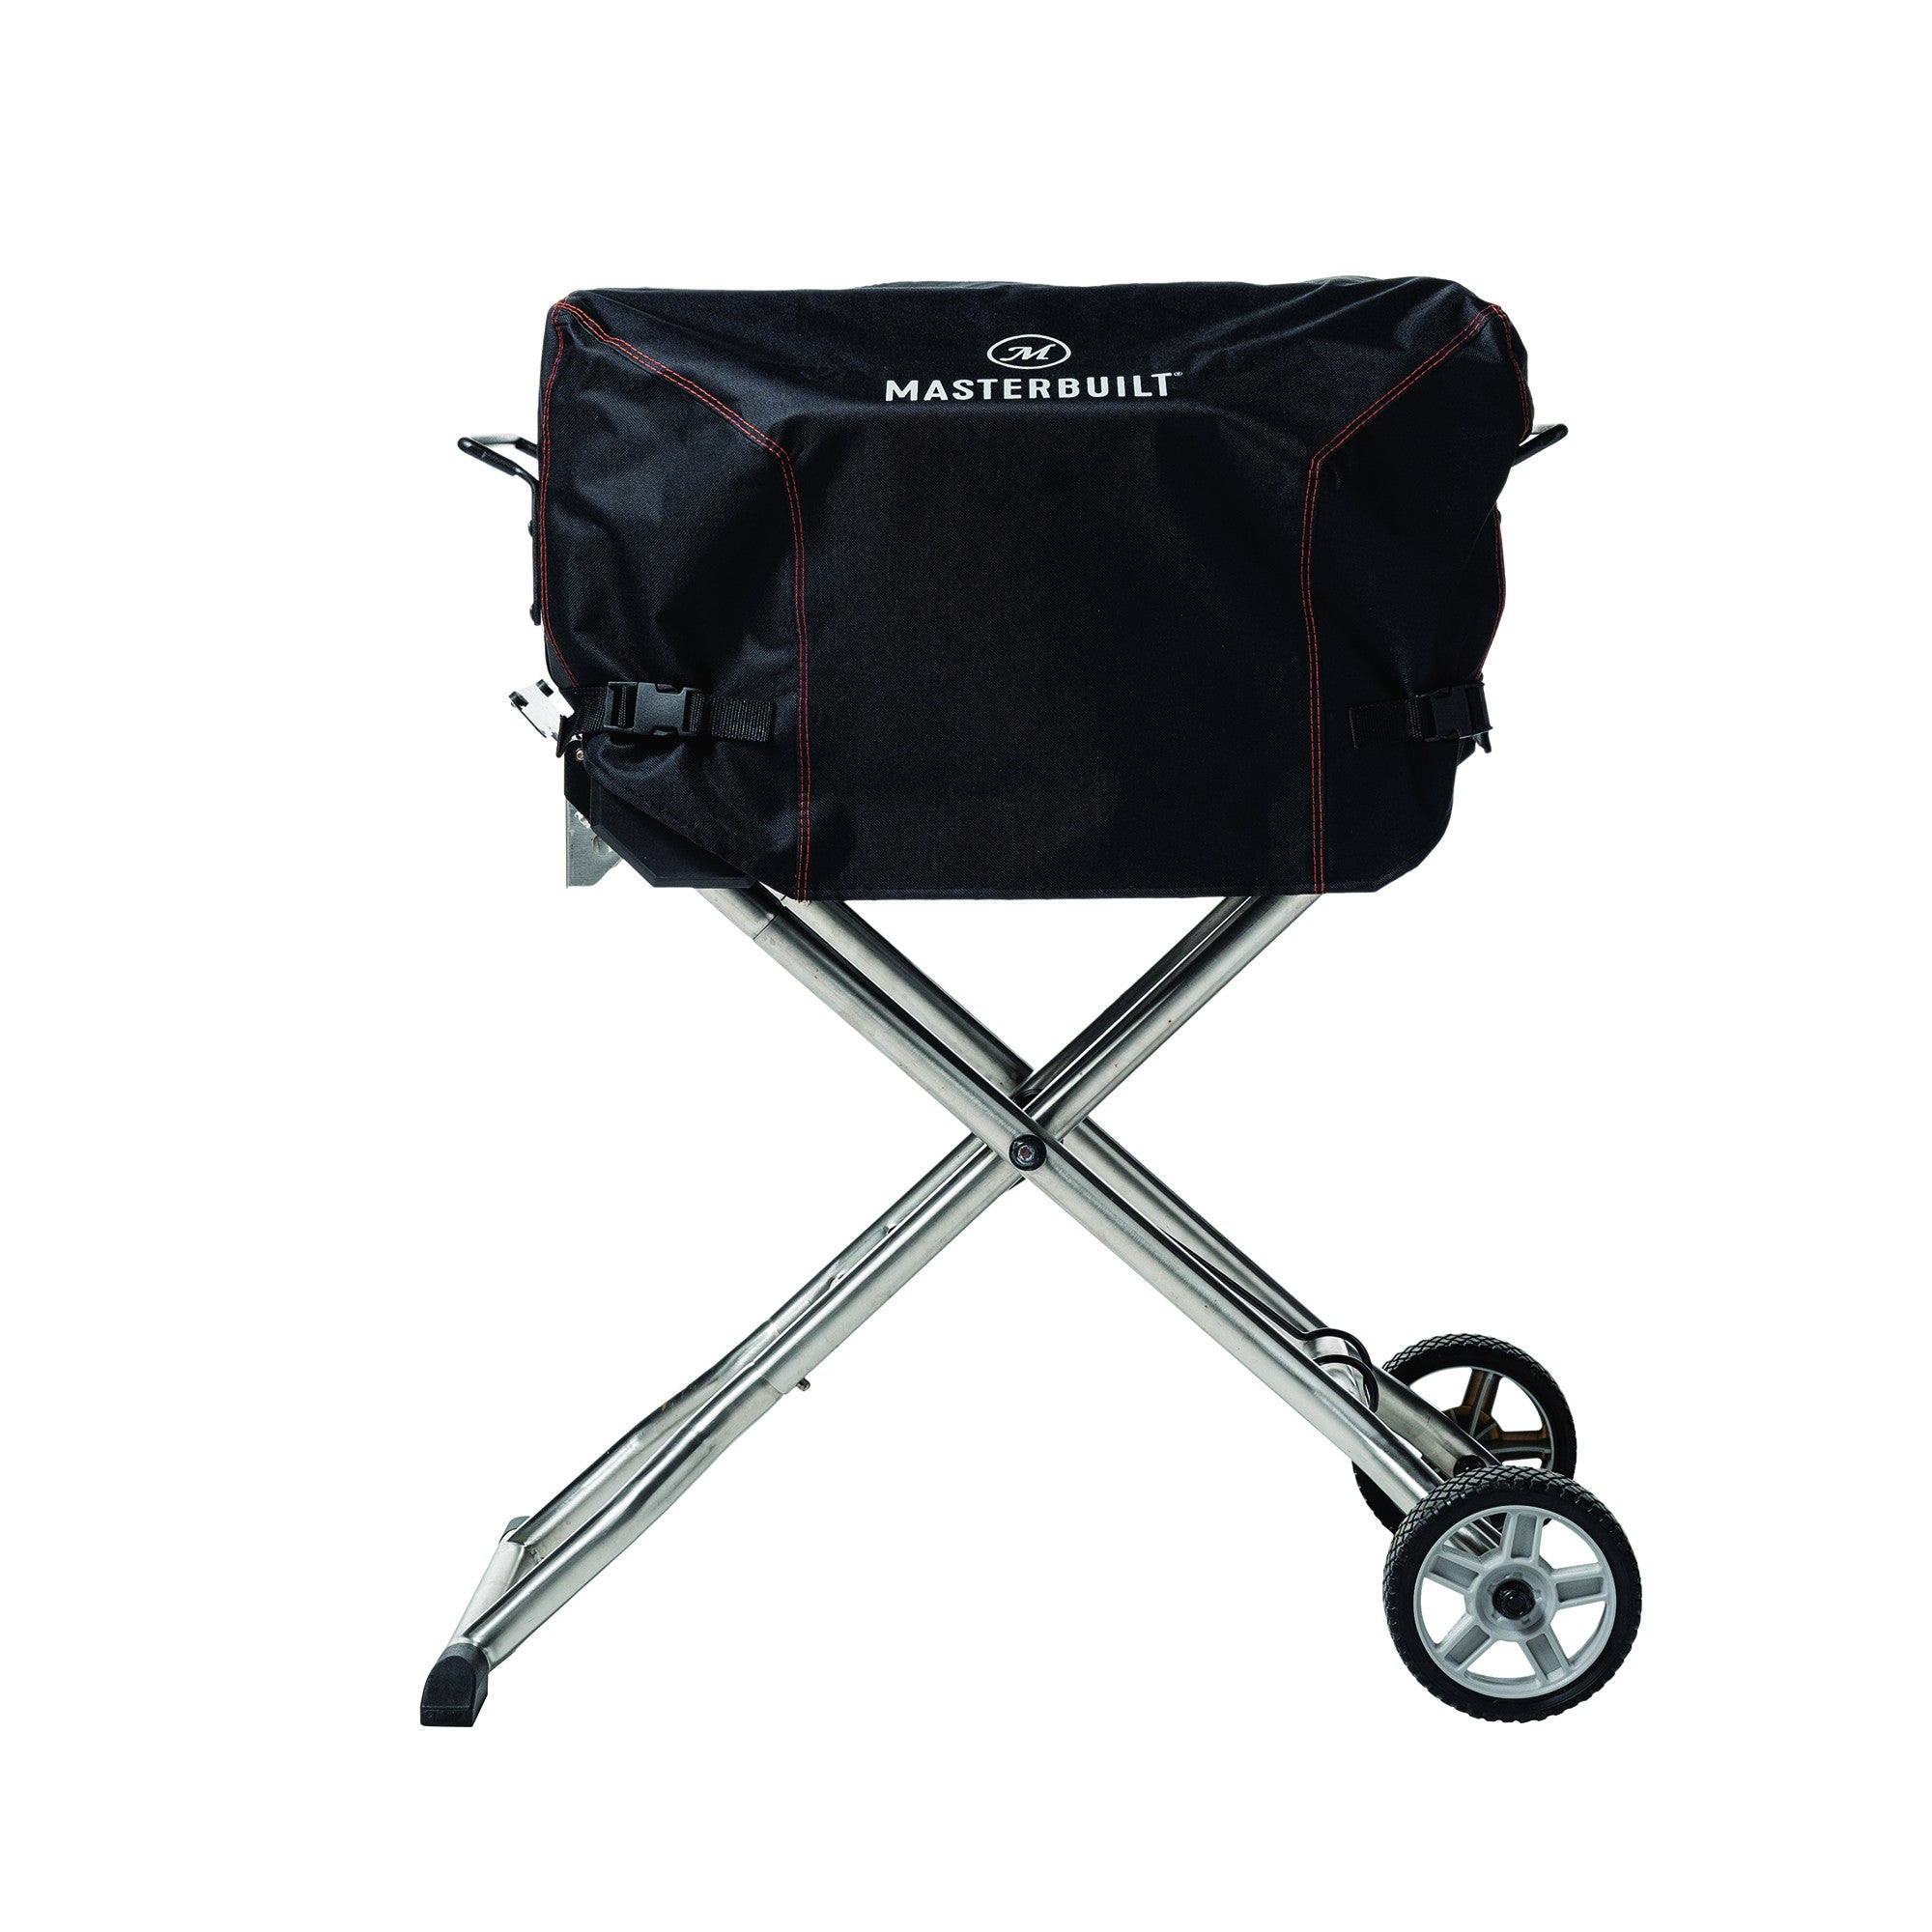 Portable Charcoal Grill Cover